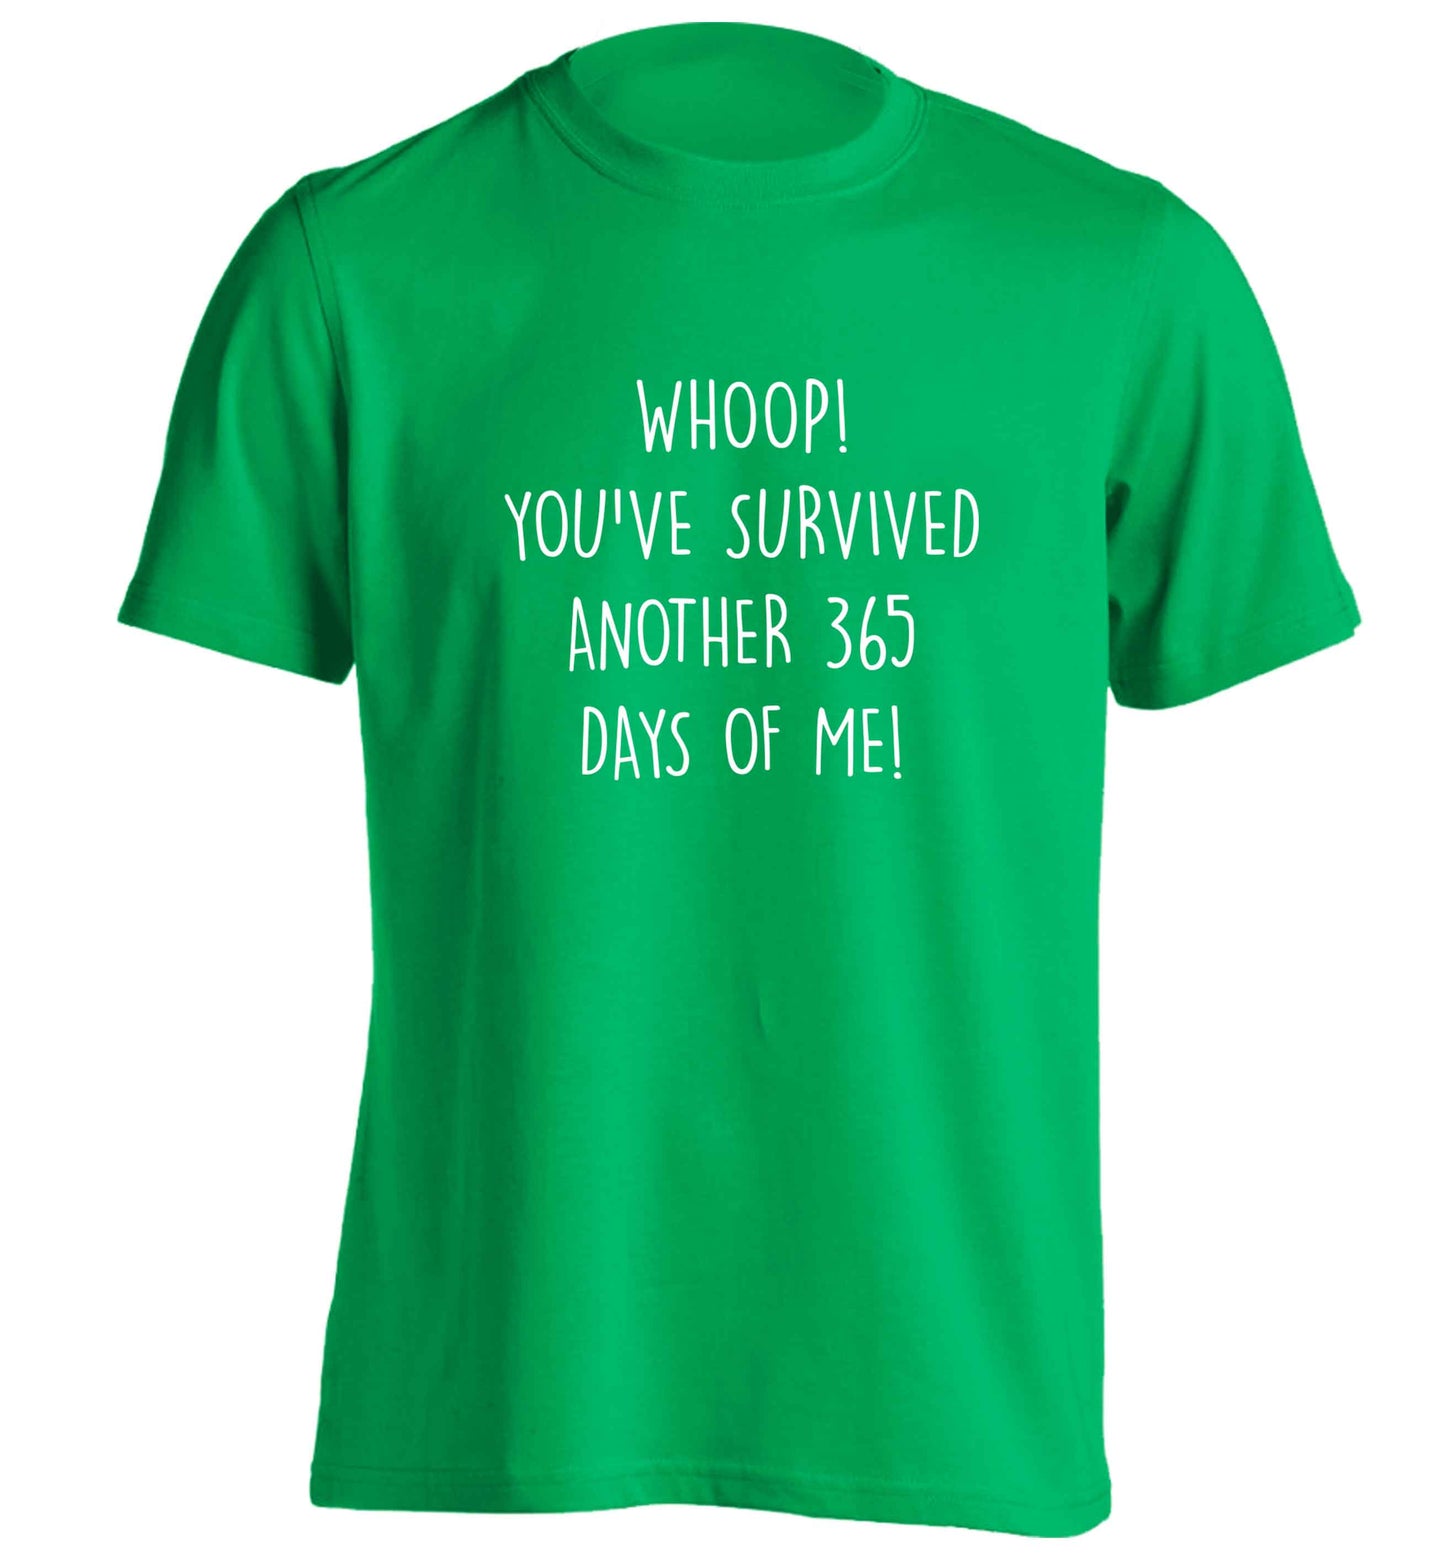 Whoop! You've survived another 365 days with me! adults unisex green Tshirt 2XL